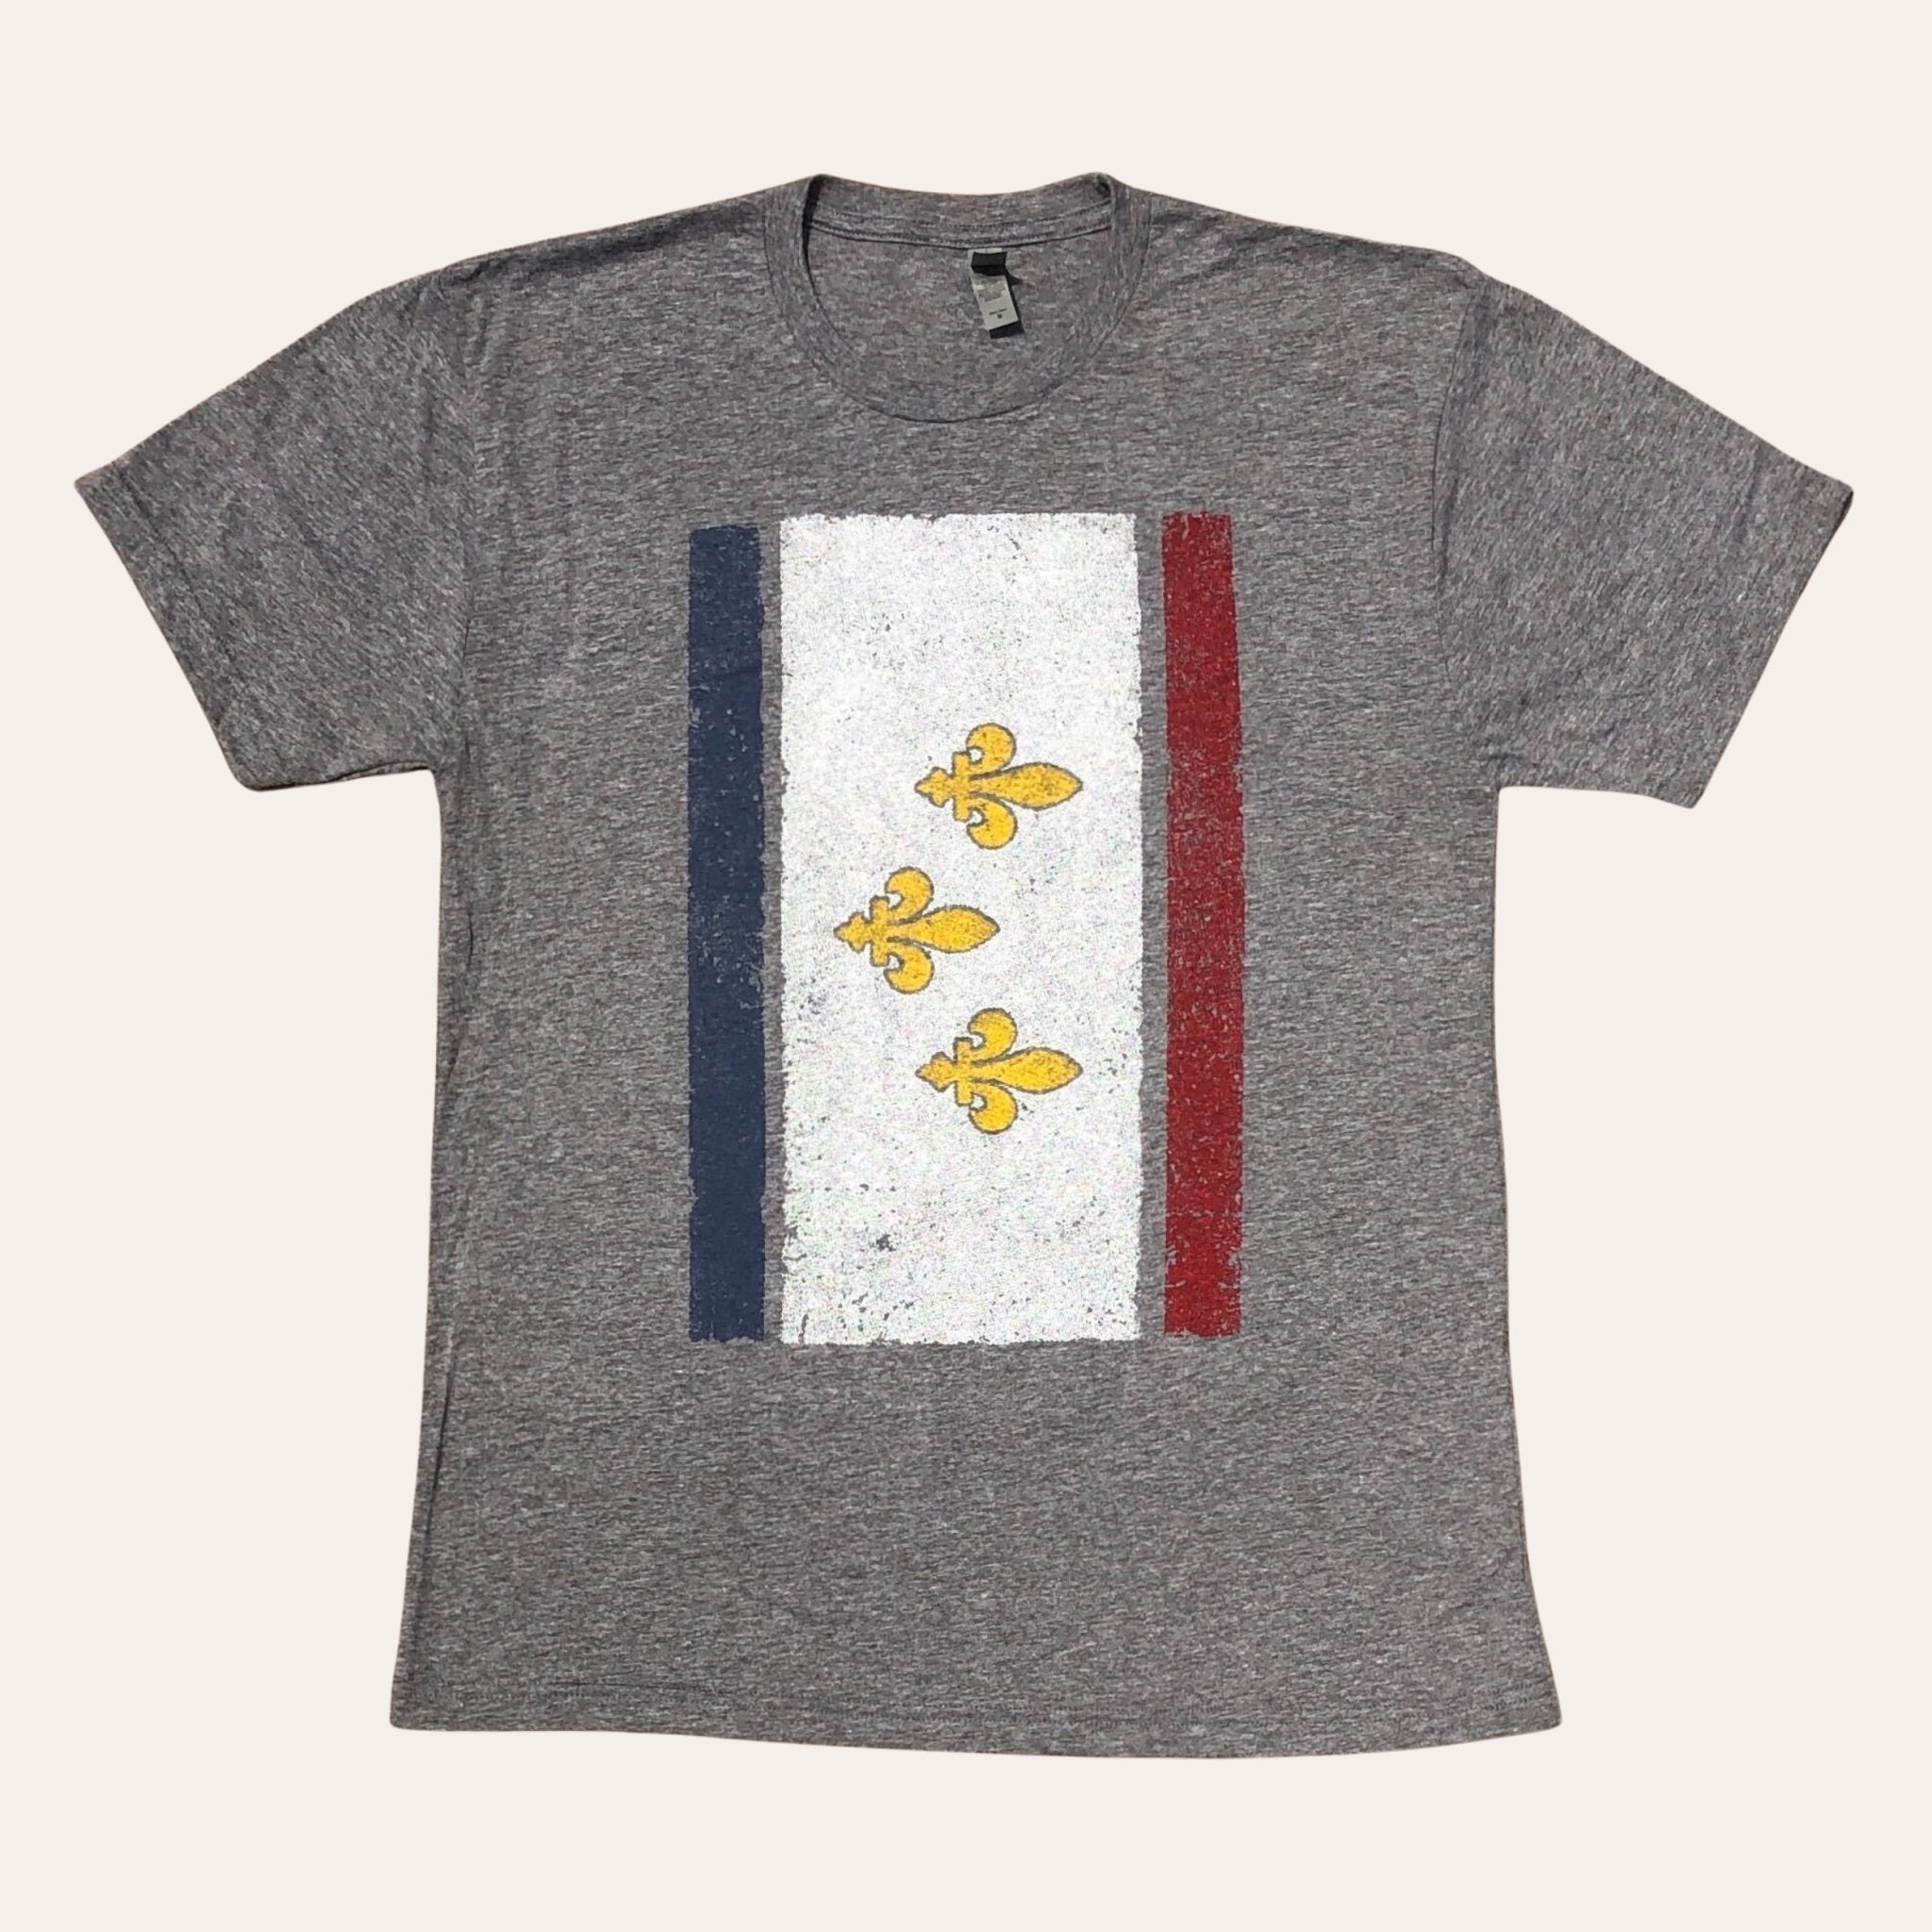 Louis Vuitton White National Parks Patches Tee